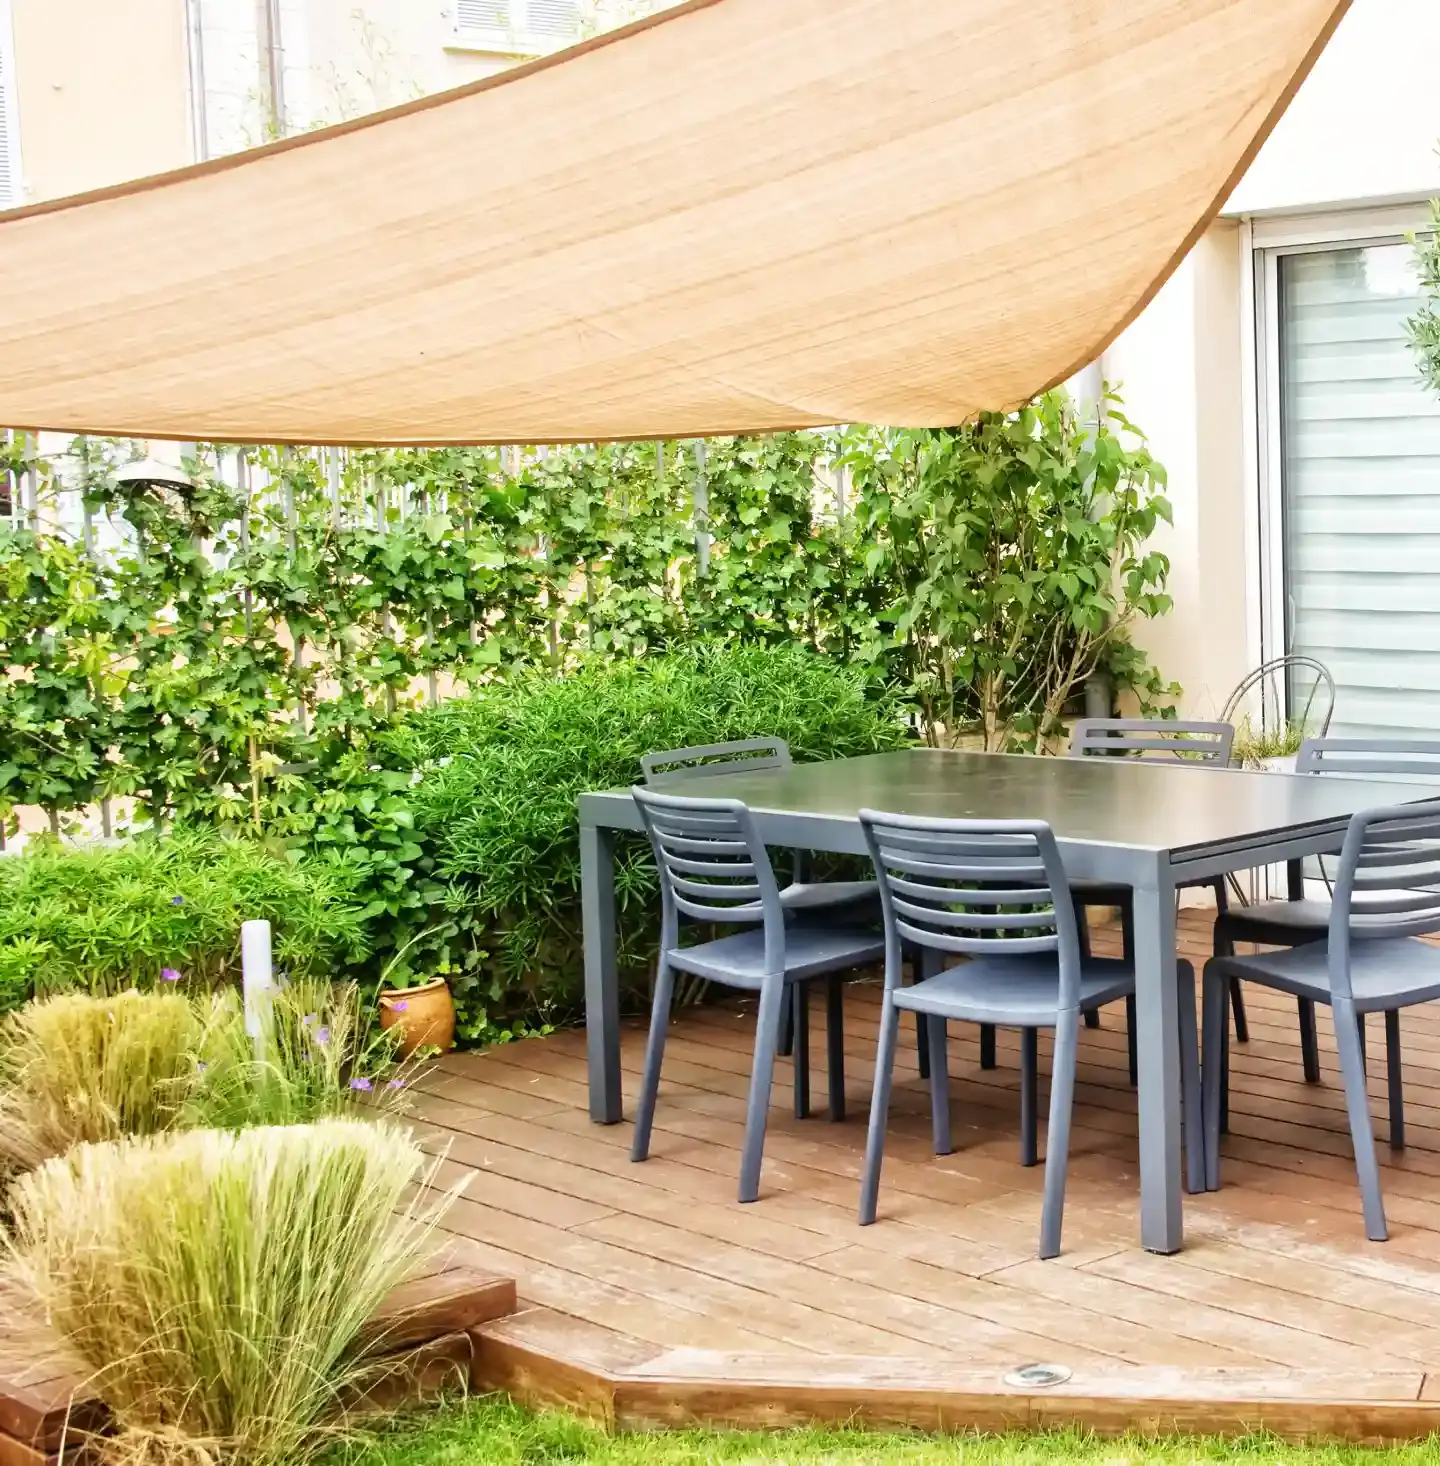 Twister Sail installed over a set of outdoor patio furniture.